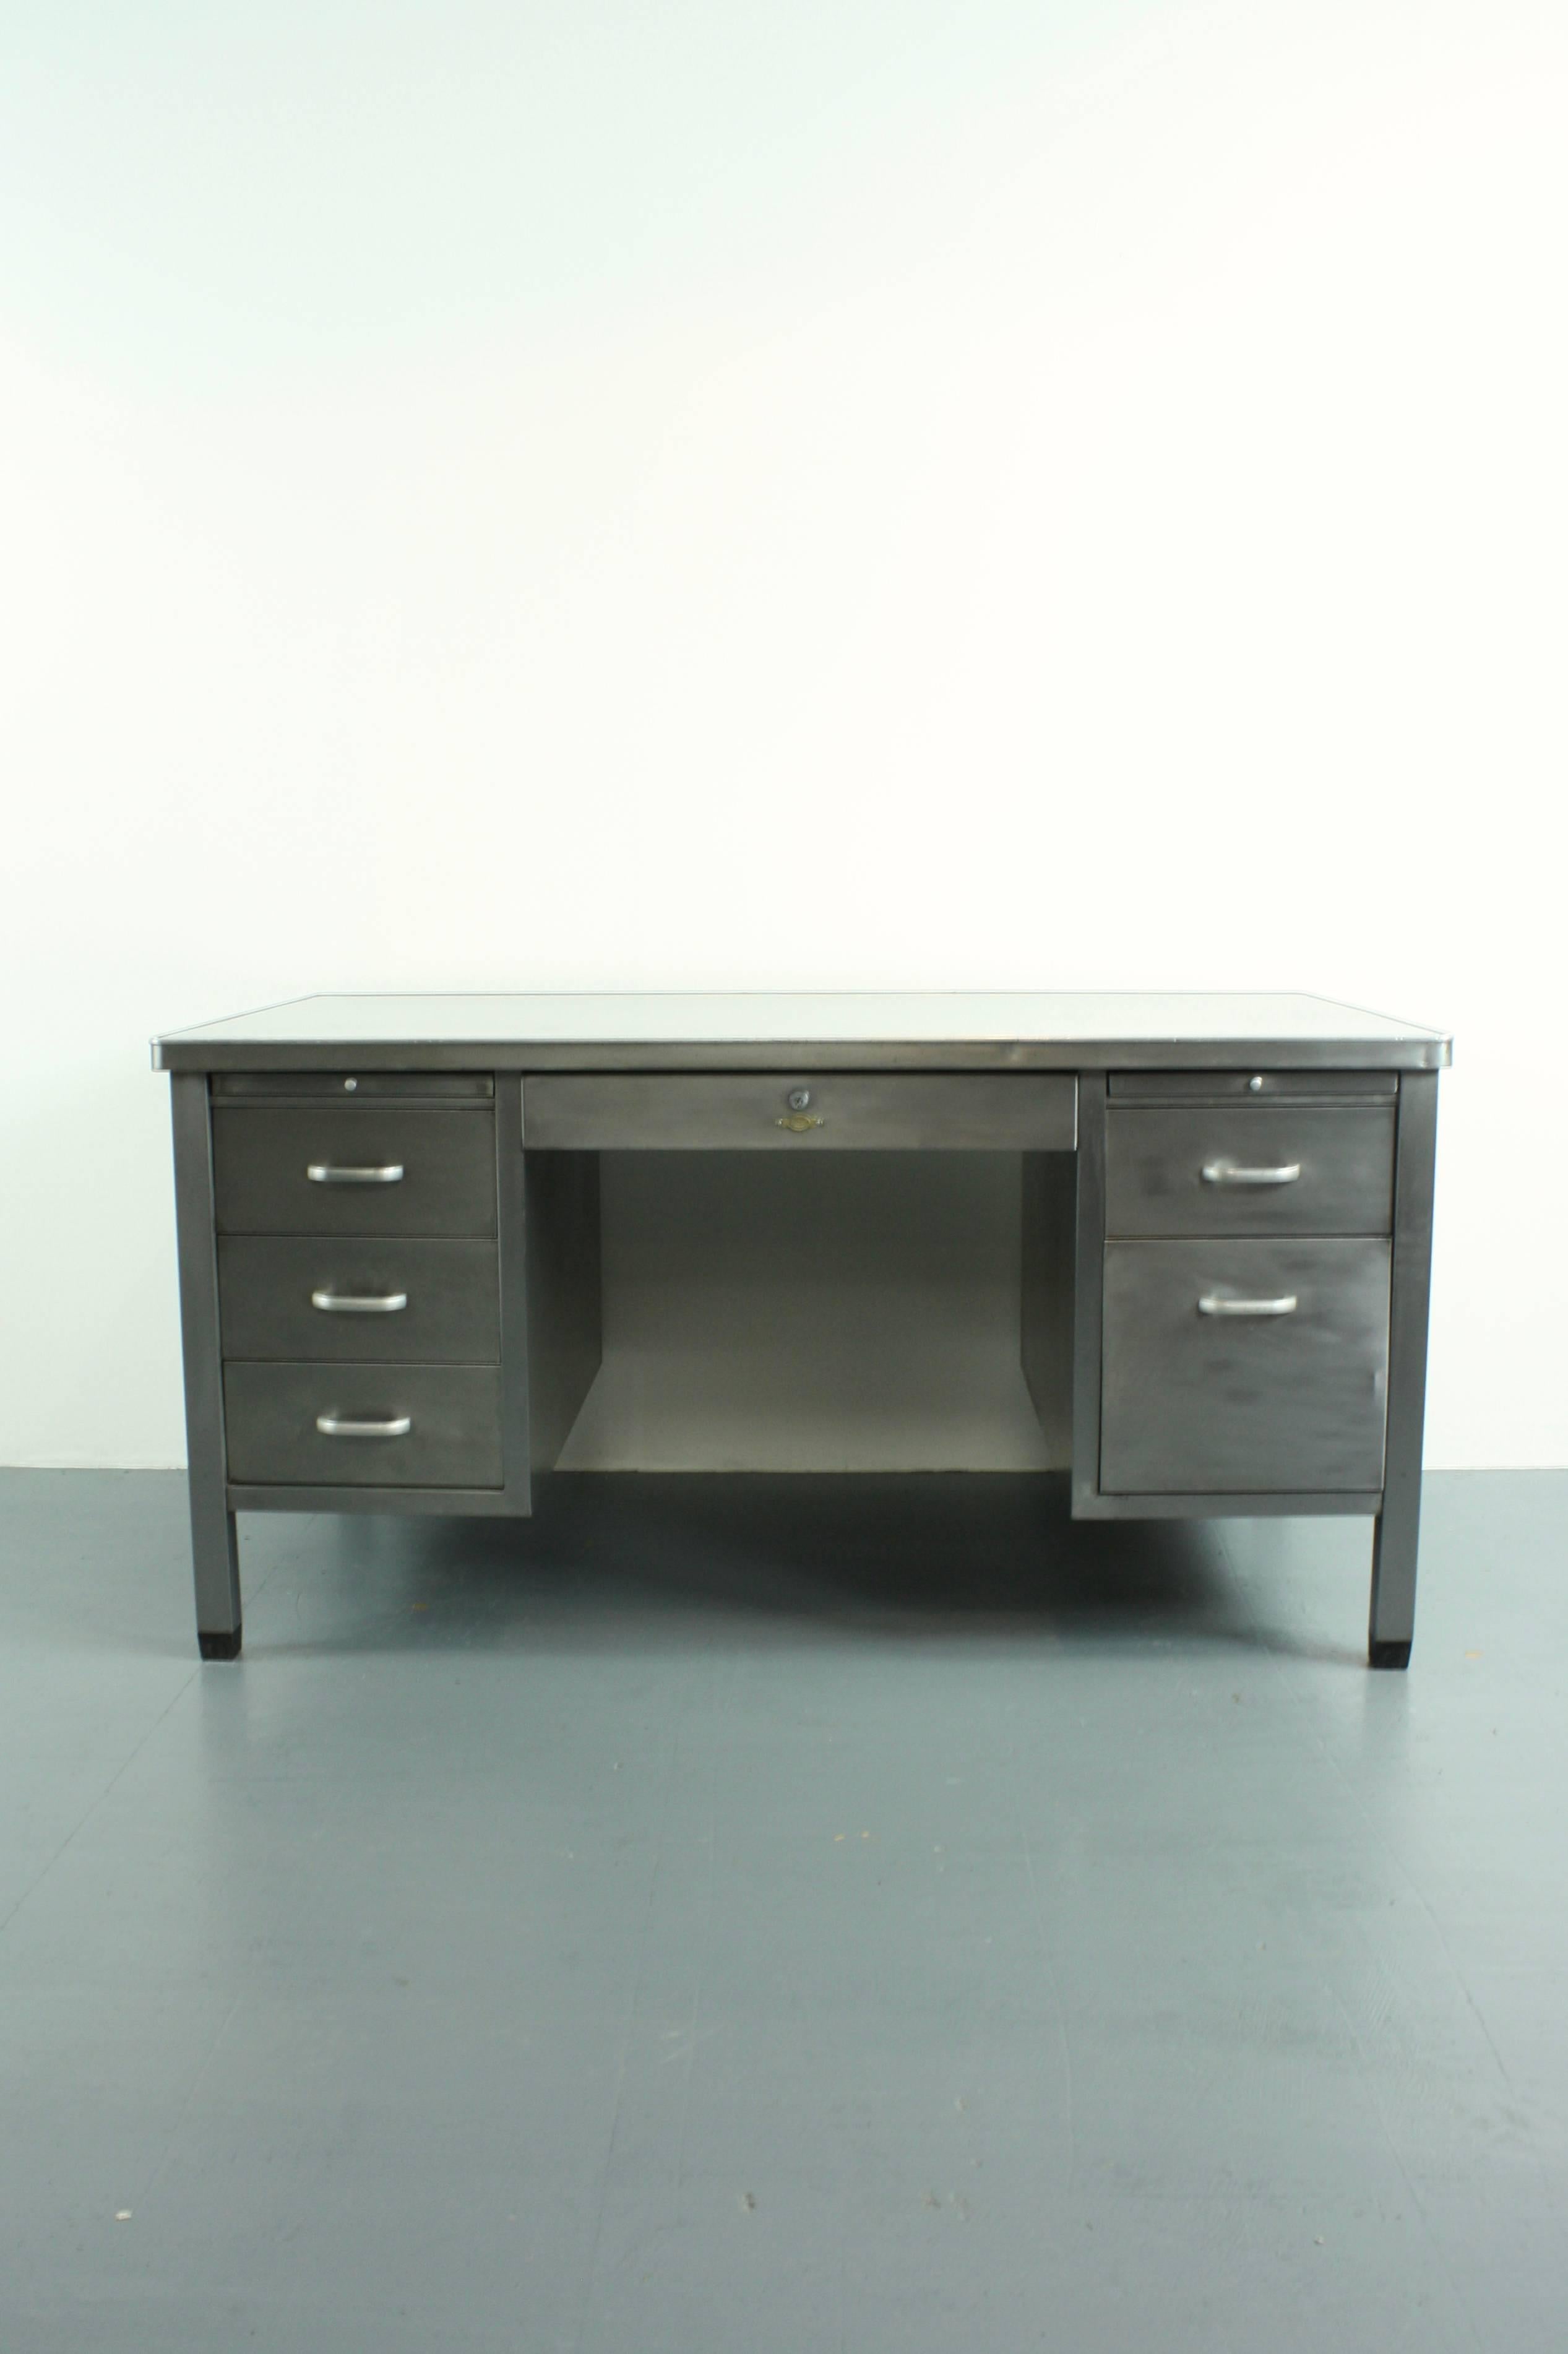 Vintage Midcentury stripped and polished double pedestal steel desk with drawers and sliding shelves, made by Art Metal. 

In good vintage condition - this piece comes from a working Industrial environment and as such, has signs of wear and tear